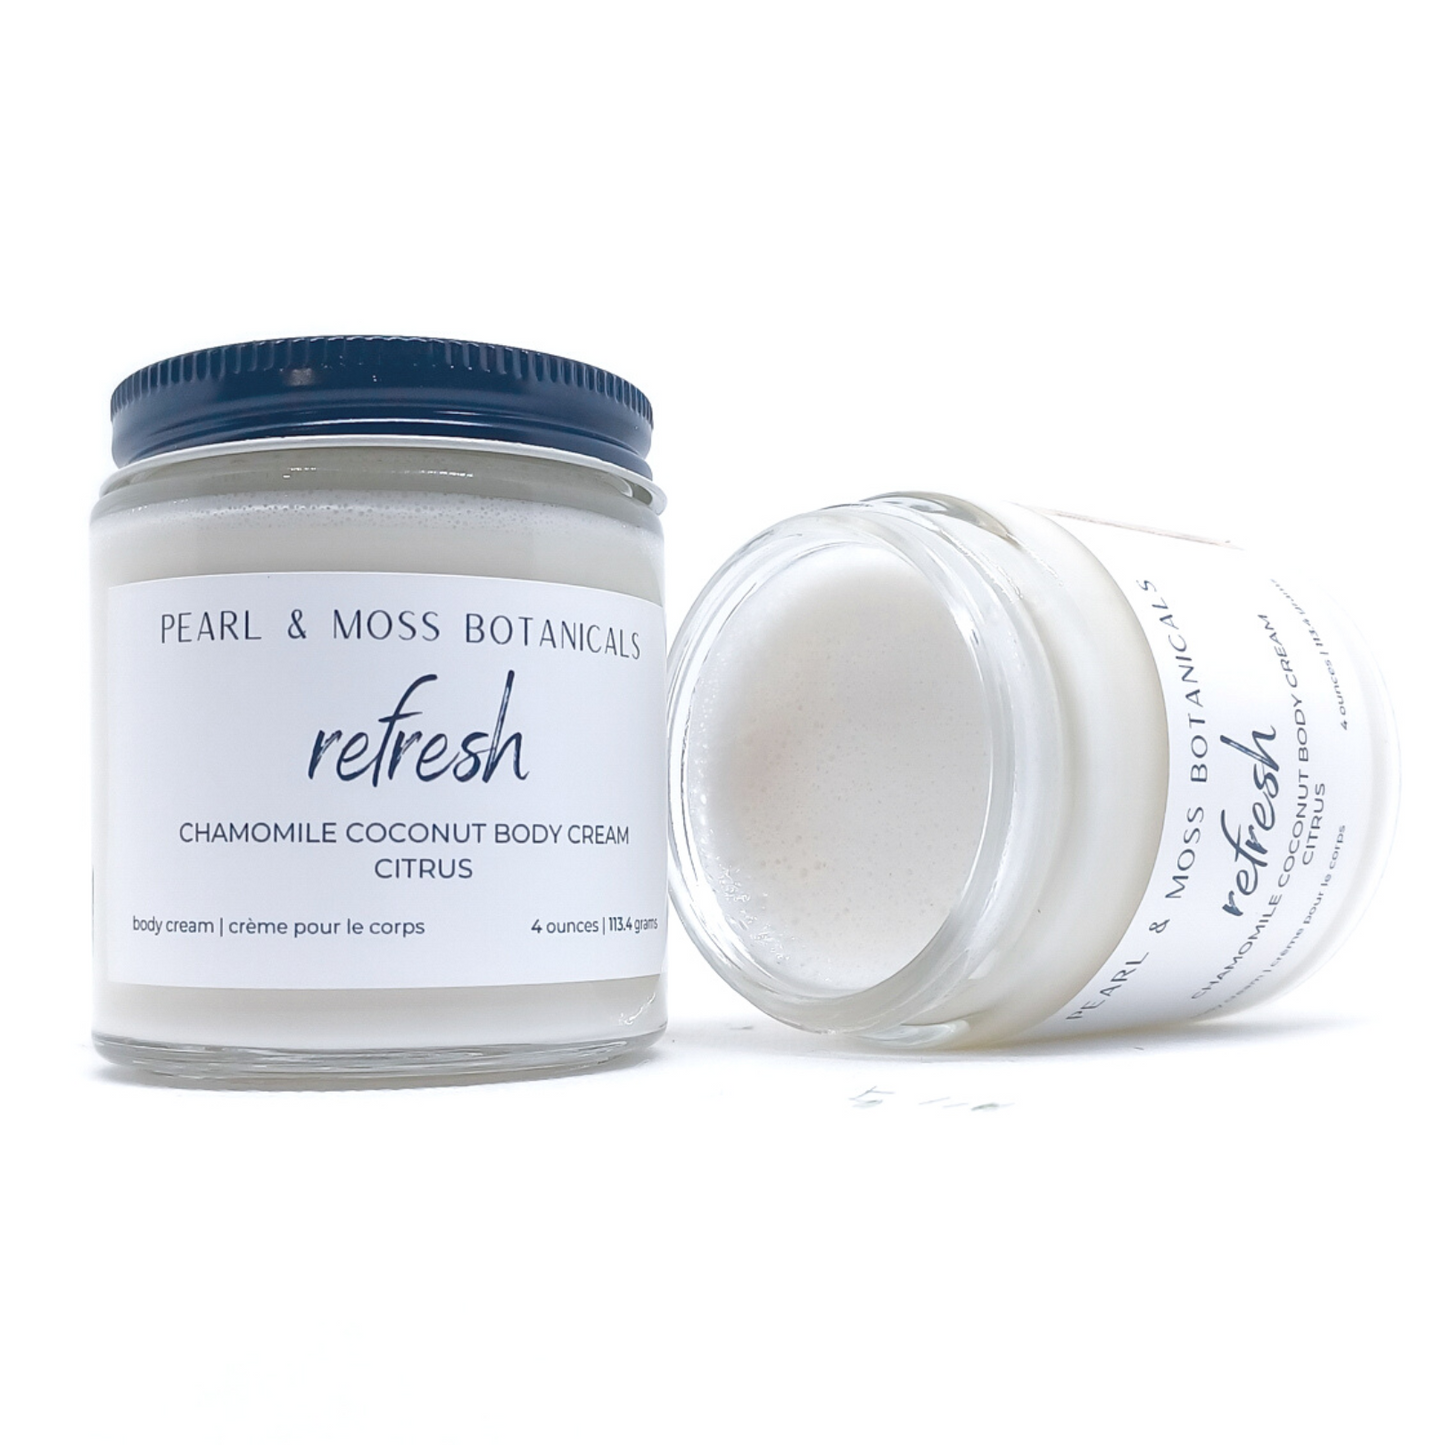 REFRESH: Light and citrusy, REFRESH is a blend of pink grapefruit, bergamot and sweet orange essential oils.  Light and smooth, the Chamomile Coconut Body Cream is softening and conditioning for the skin, with extra soothing effects from chamomile extract. Rich and luxurious, tucuma and babassu butter shine in this body cream, bringing a velvety smooth finish to your skin, while providing delicious hydration to your skin, courtesy of coconut water.